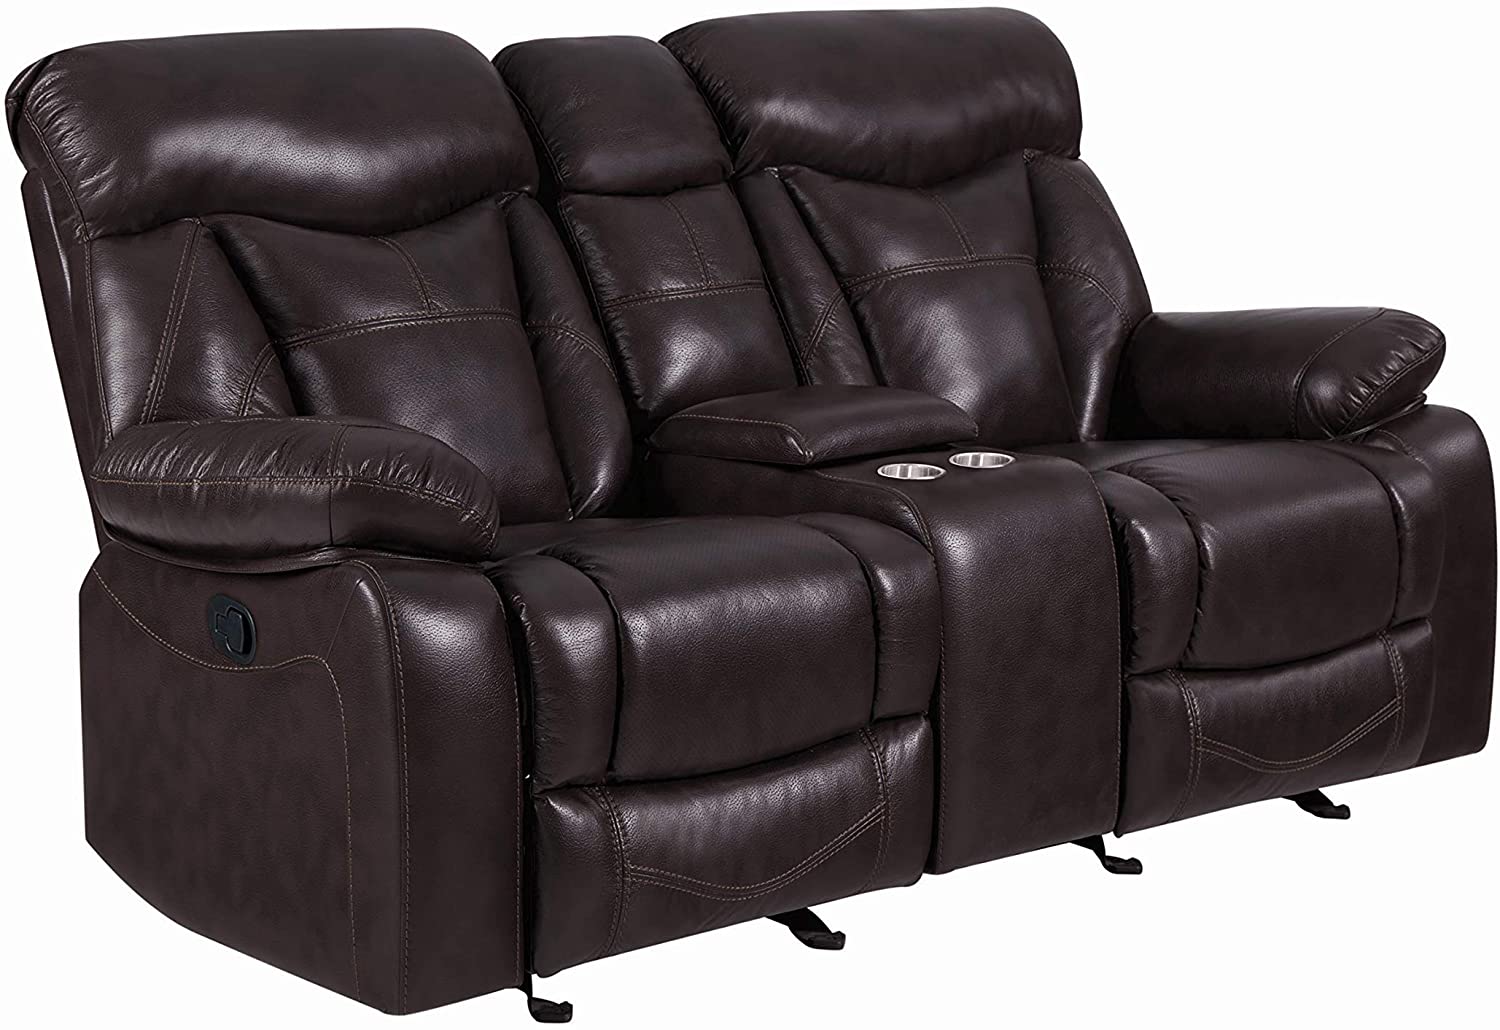 Best Reclining Sofas Of 2021, Most Comfortable Reclining Sofa 2021